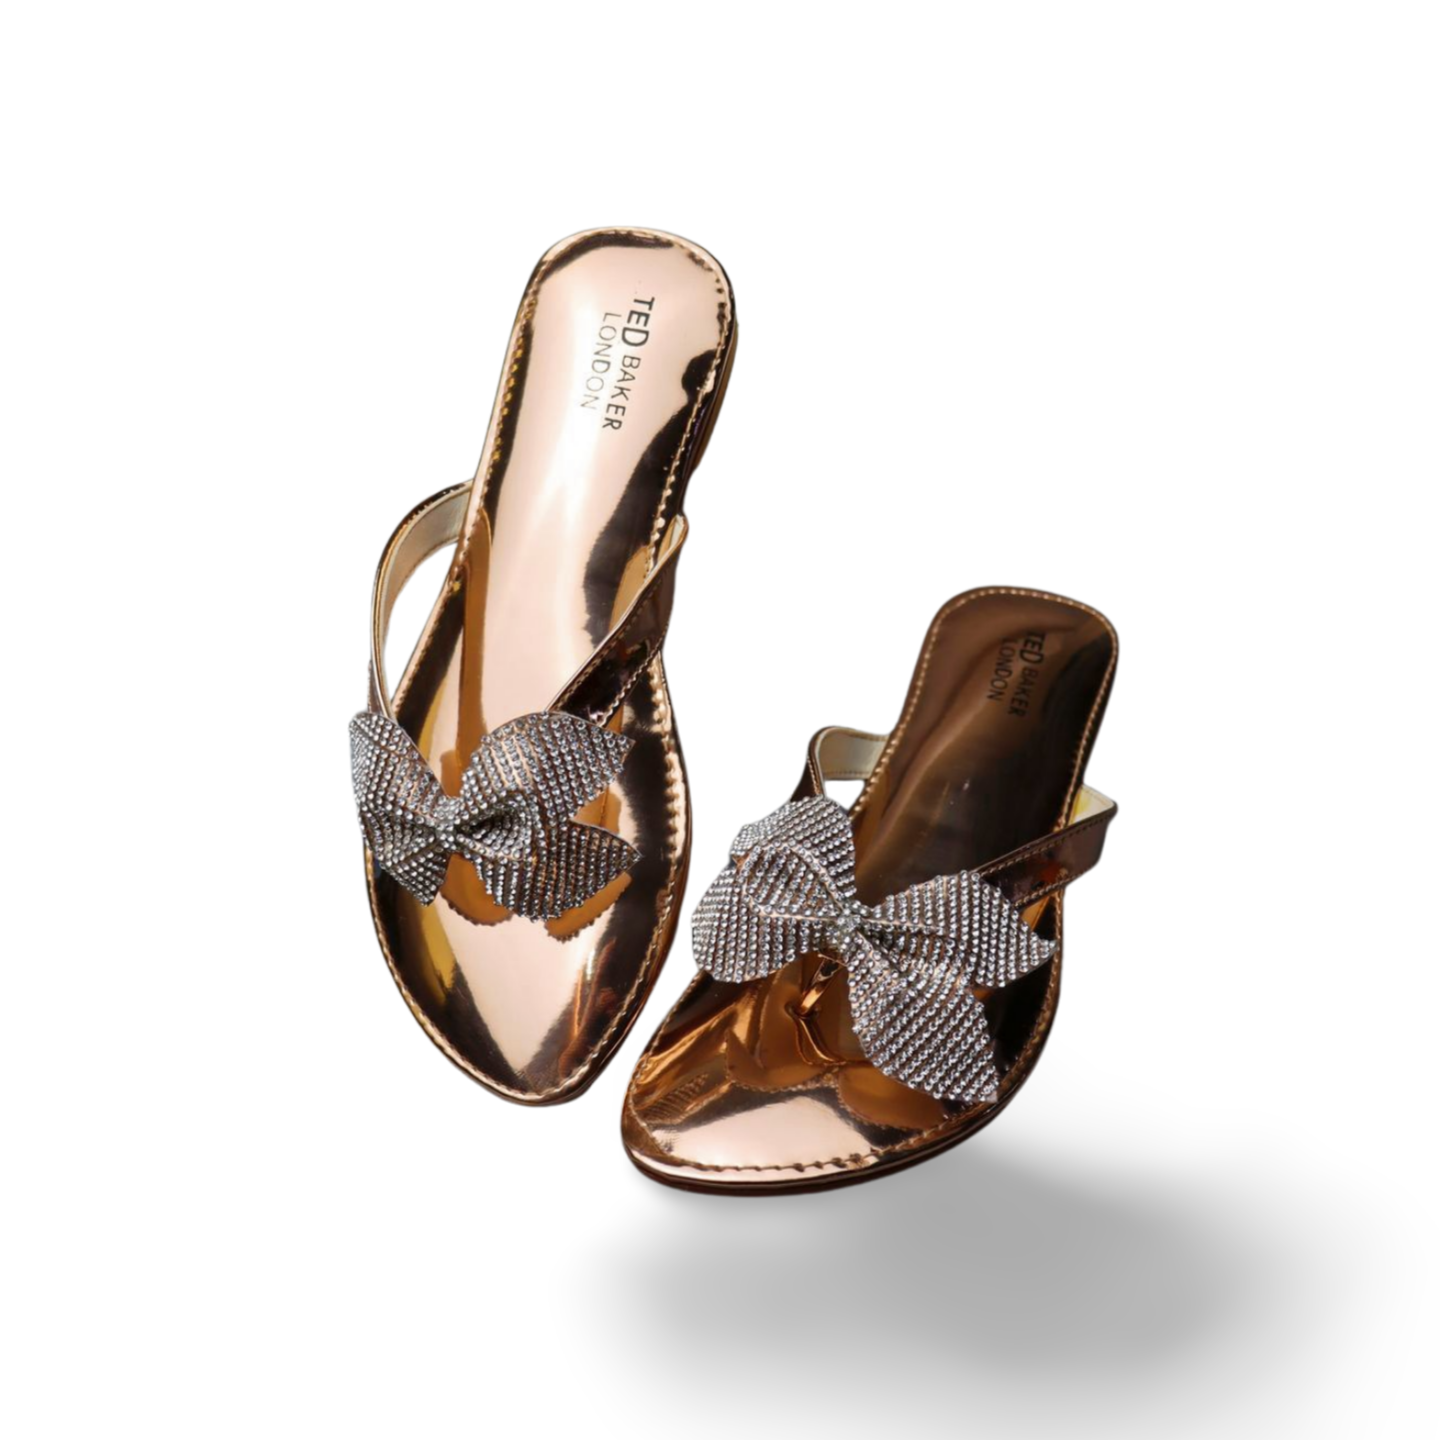 Sparkling Crystal Bow Flat Sandals - Elegant Comfort for Any Occasion